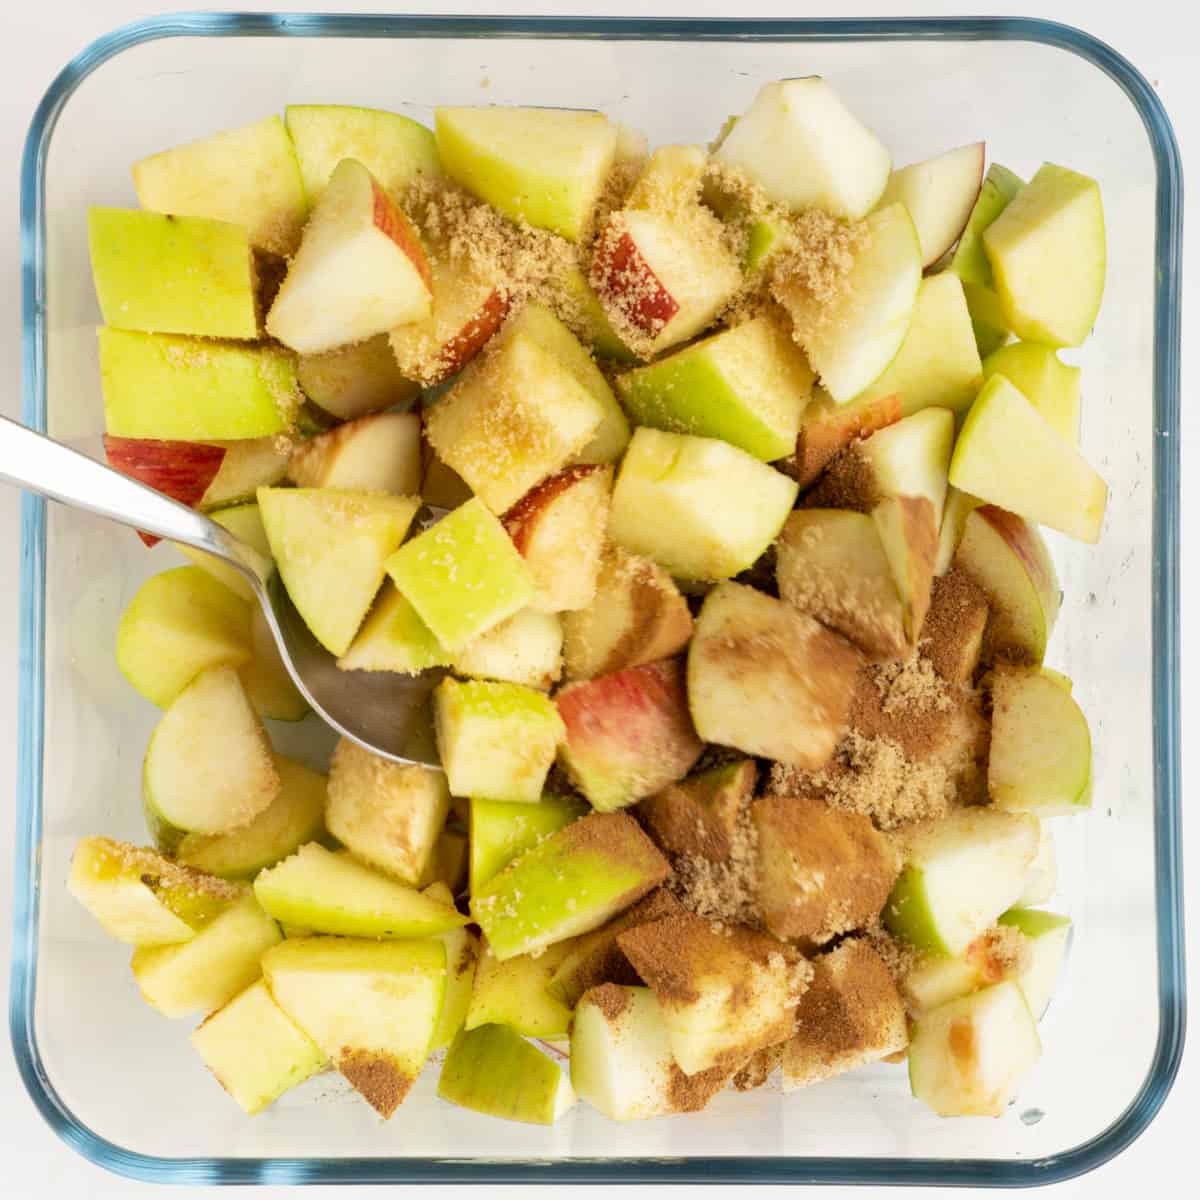 Diced apples with brown sugar and cinnamon in a baking dish.